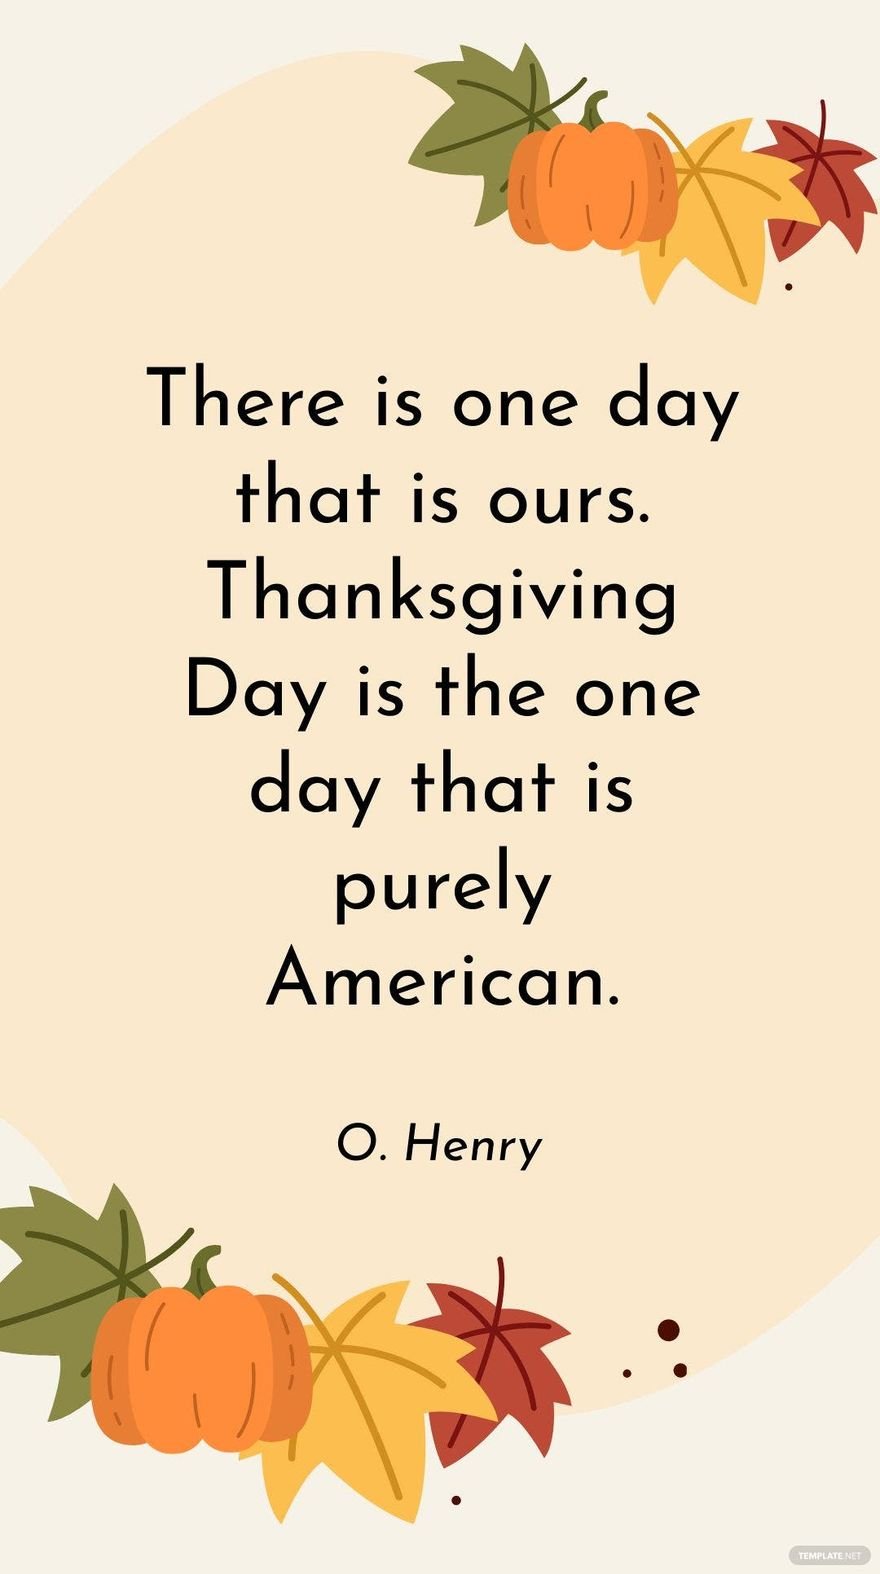 Free O. Henry - There is one day that is ours. Thanksgiving Day is the one day that is purely American.